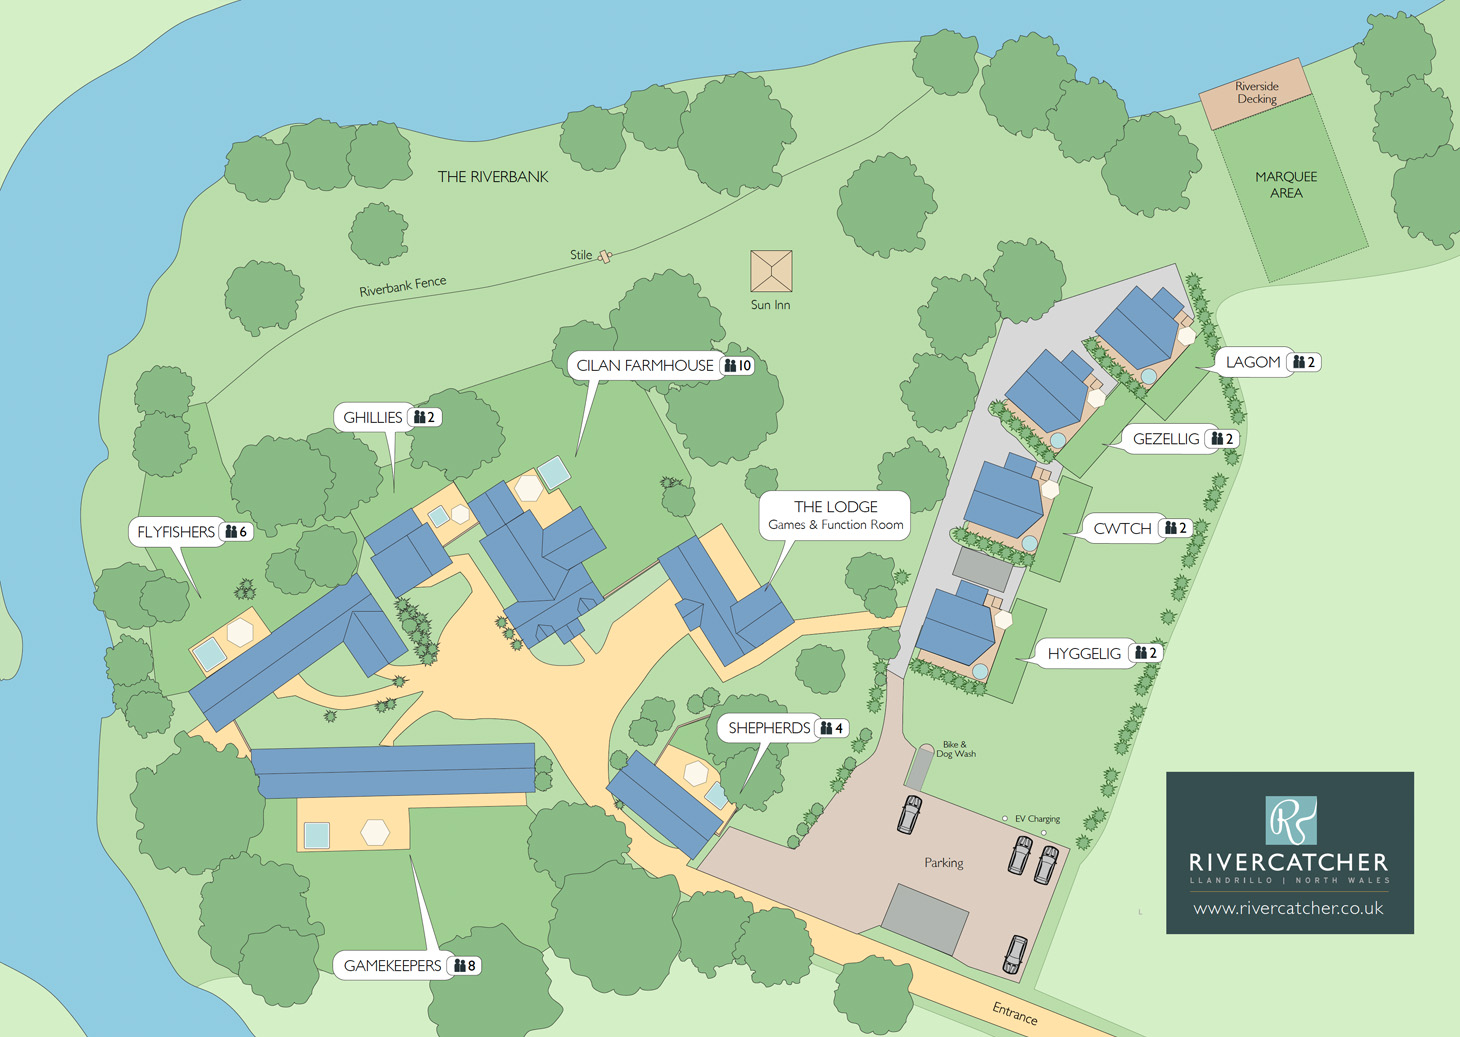 The plan of Rivercatcher Luxury Holiday Cottages and Log Cabins